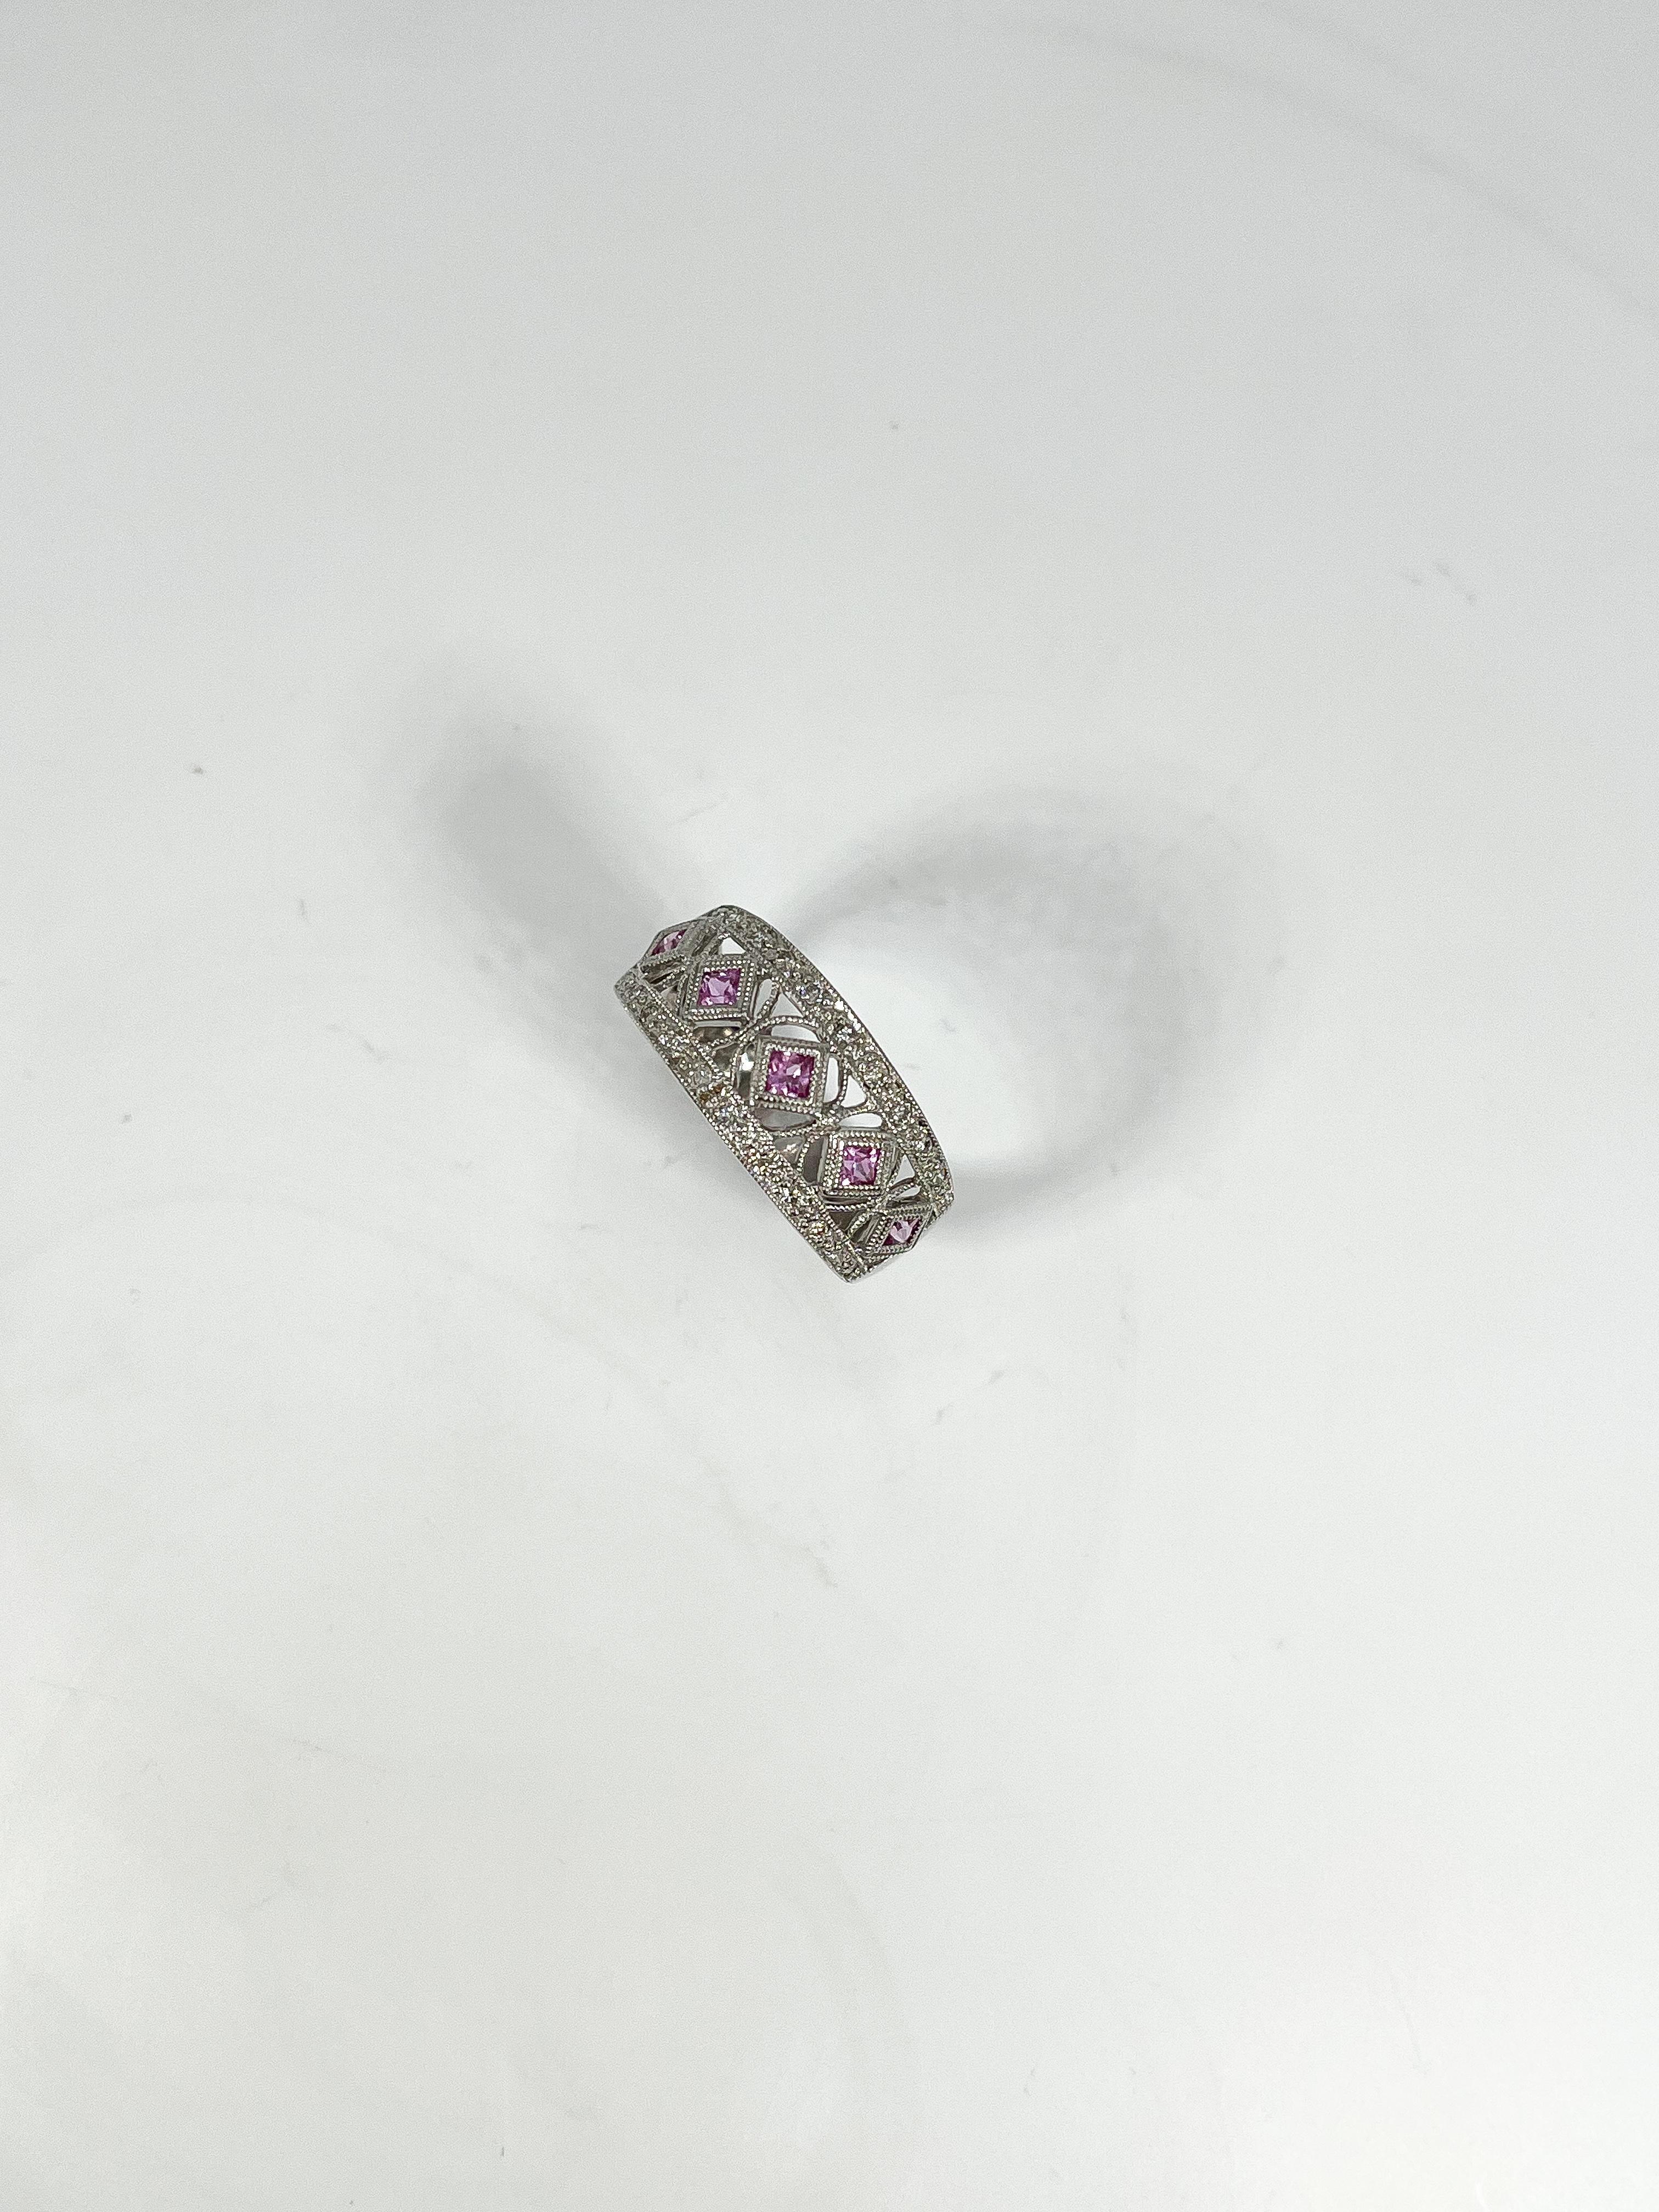 14k white gold pink sapphire .50 CTW and diamond .25 CTW band. 5 total princess cut pink sapphires and diamond accents. The rings width is 9.1 mm, measures a size 8 1/4, and has a total weight of 4.18 grams.